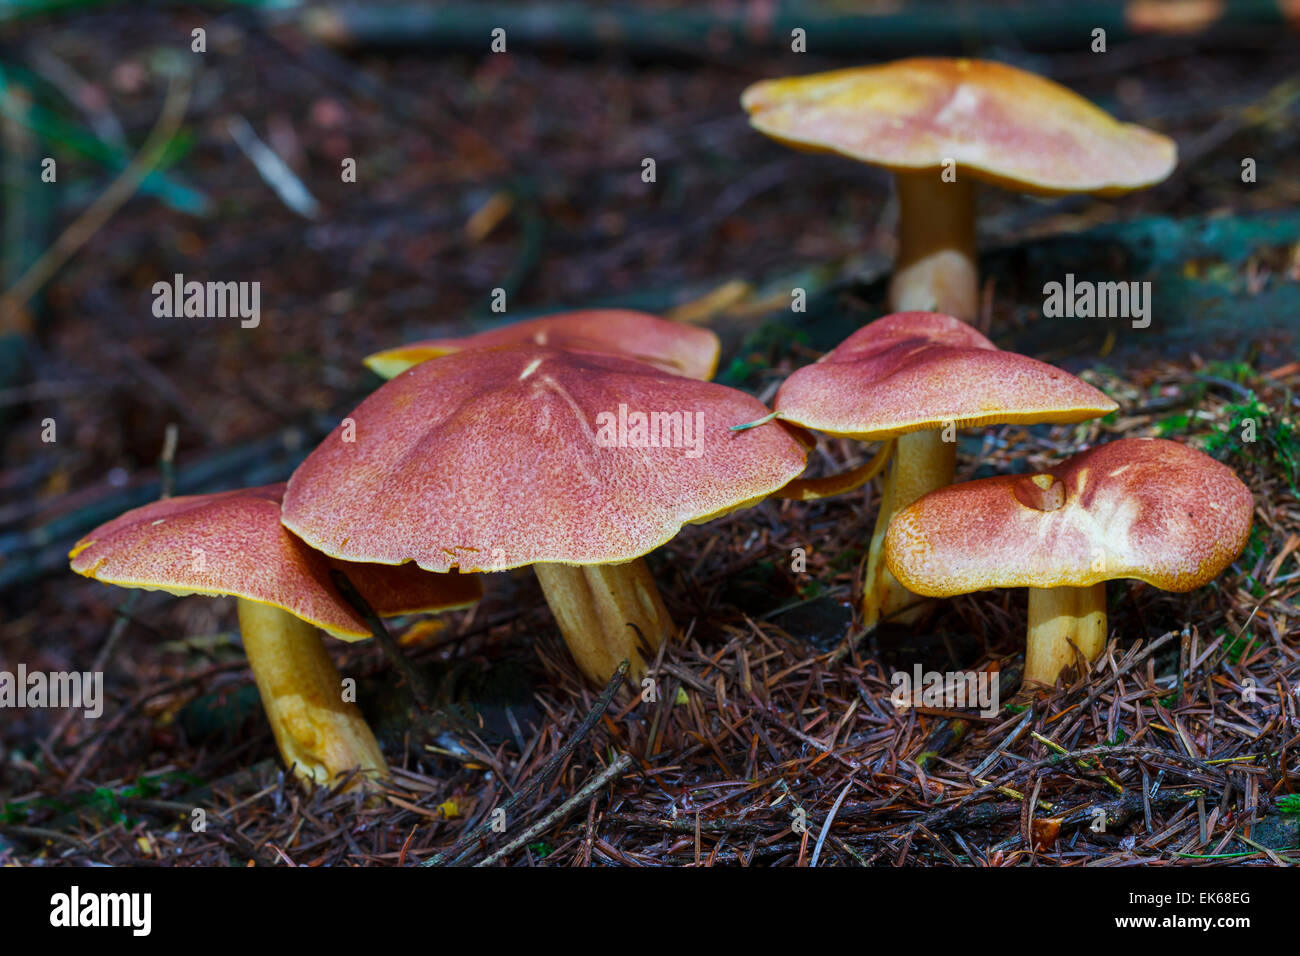 Plums and Custard or Red-haired agaric (Tricholomopsis rutilans) mushrooms. Gorbeia Natural Park. Alava, Spain, Europe. Stock Photo